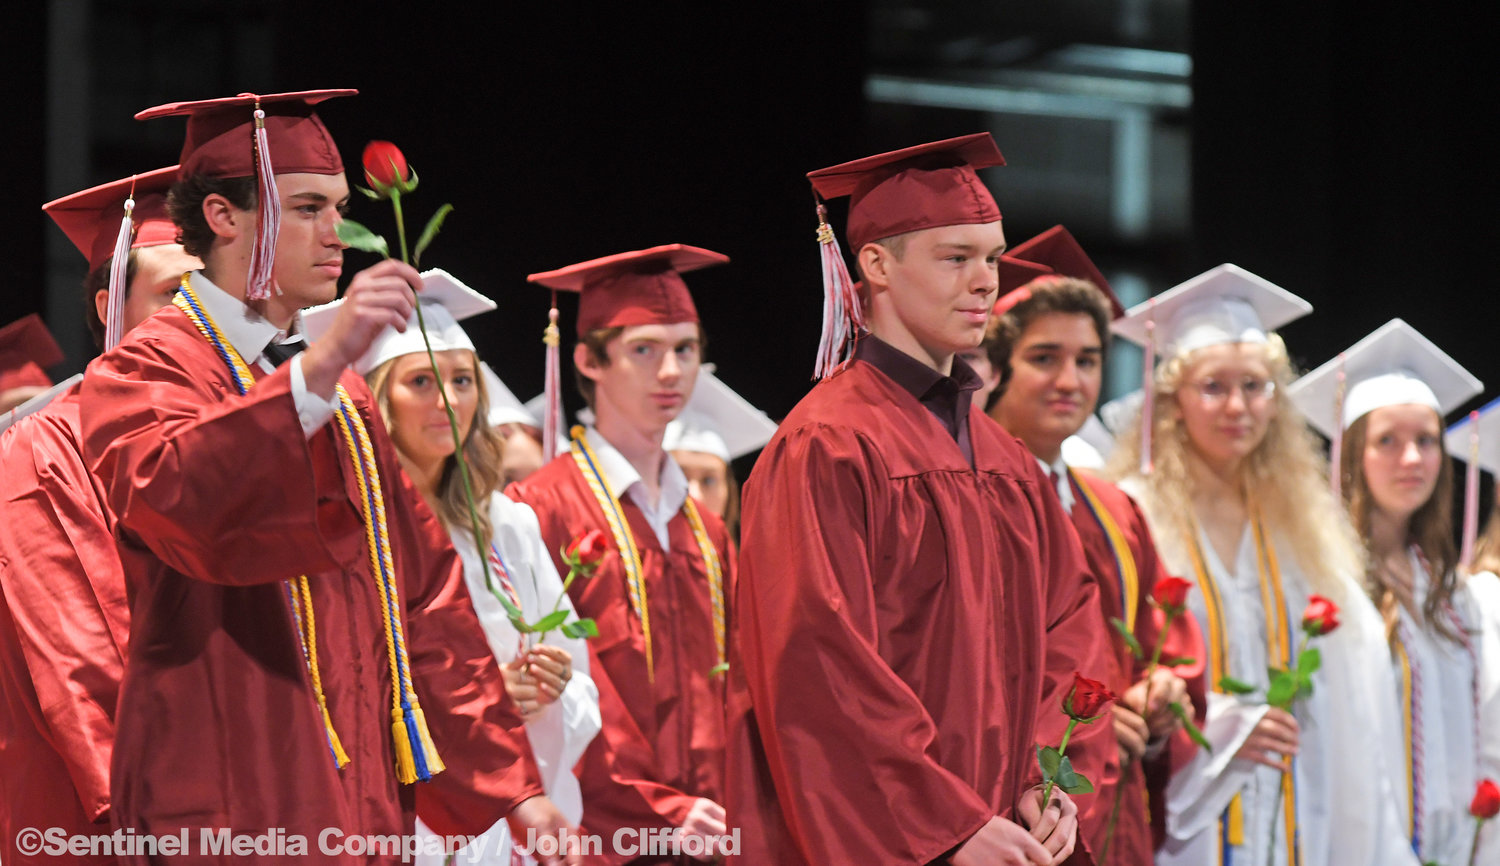 The 91st Clinton Central School commencement, Saturday, June 18, 2022 at the high school auditorium.